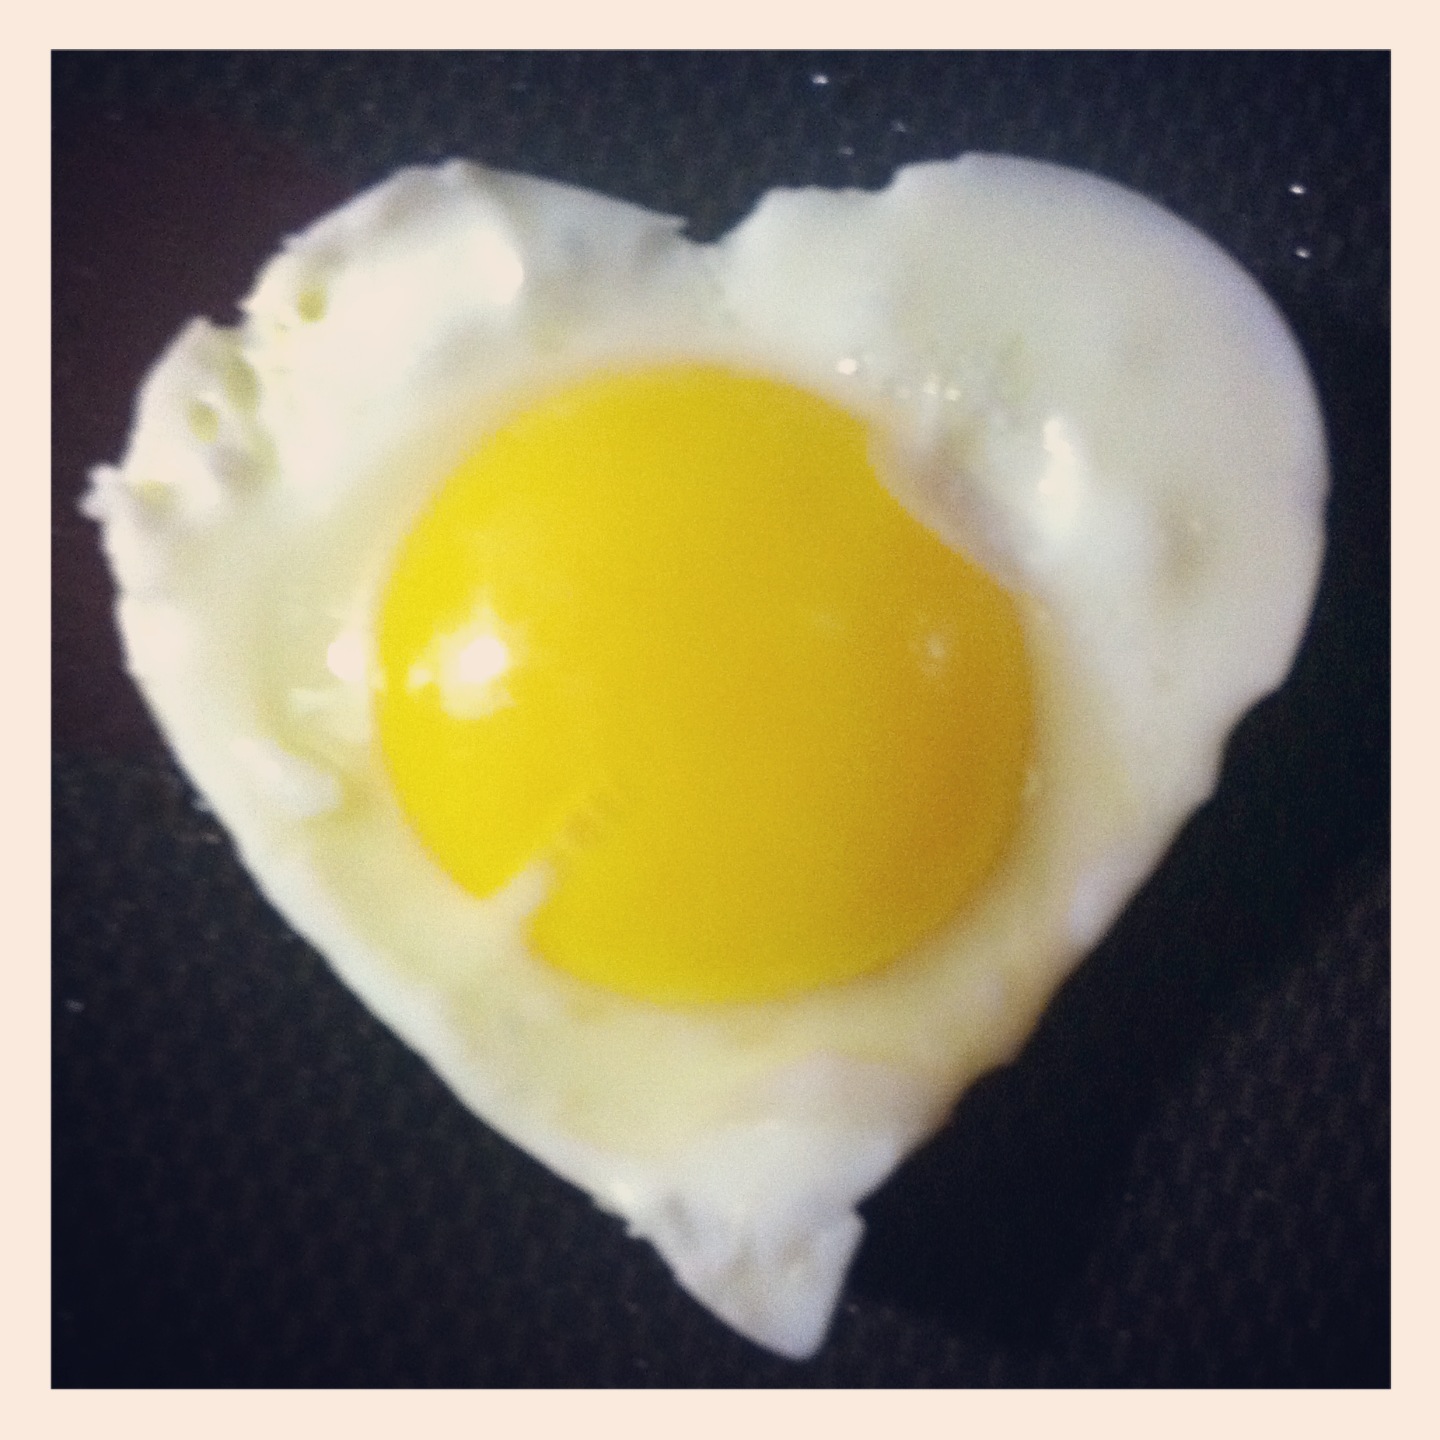 Eggs and Heart Health: Friend or Foe?  A Look at the Science